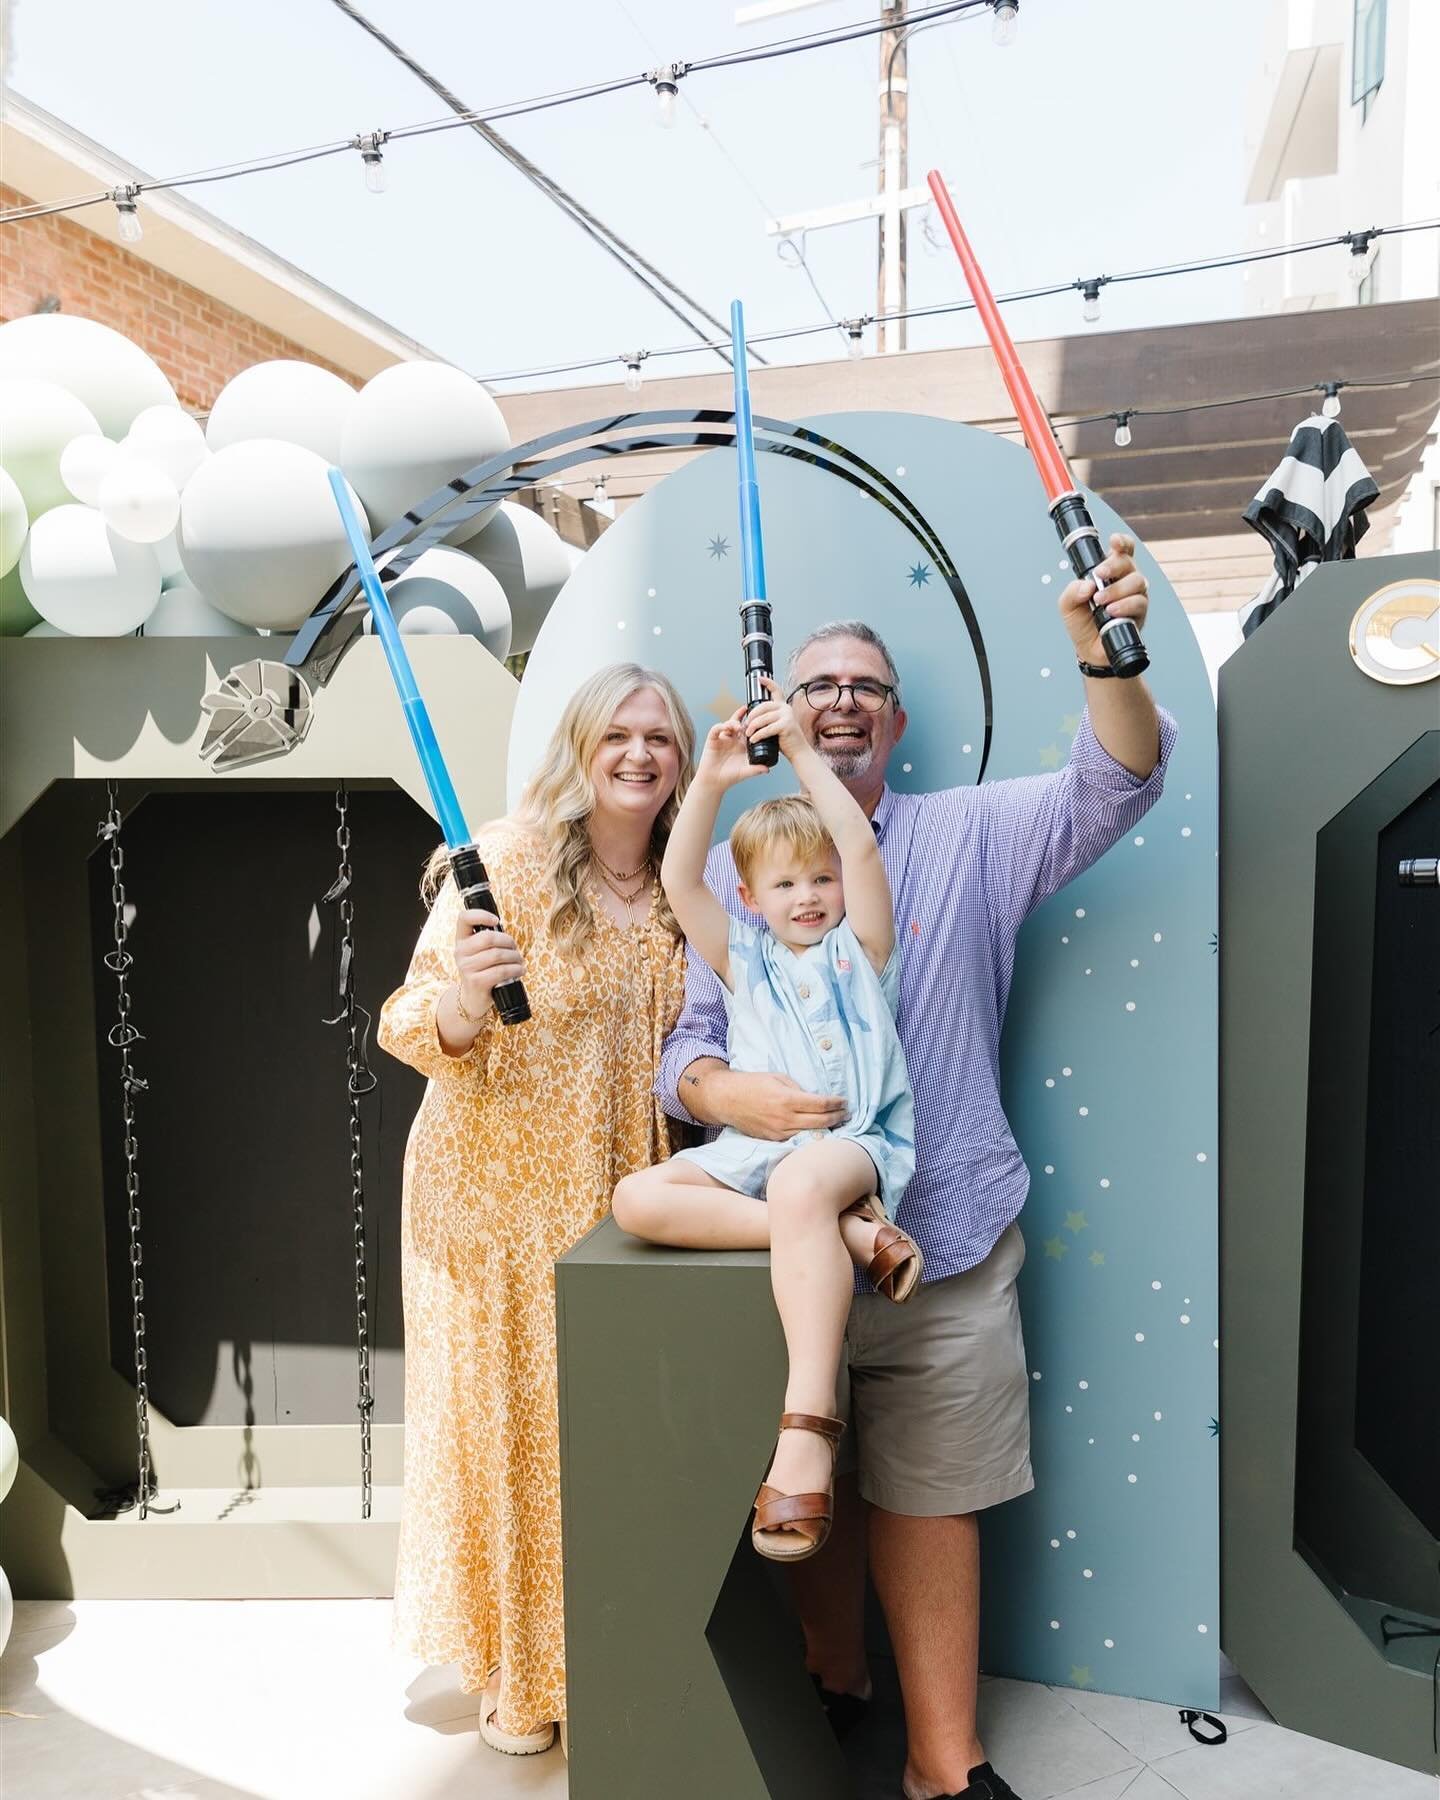 May the 4th be with you!

Design &amp; Balloons: @stay.goldendesign 
Backdrop: @papergardenxoxo 
Signage: @creativeamme 
Welcome Sign + Details: @chelceacreative 
Rentals: @sweetsalvagerentals 
Popcorn Cart: @twistedforsugar 
Kids Craft: @createandce